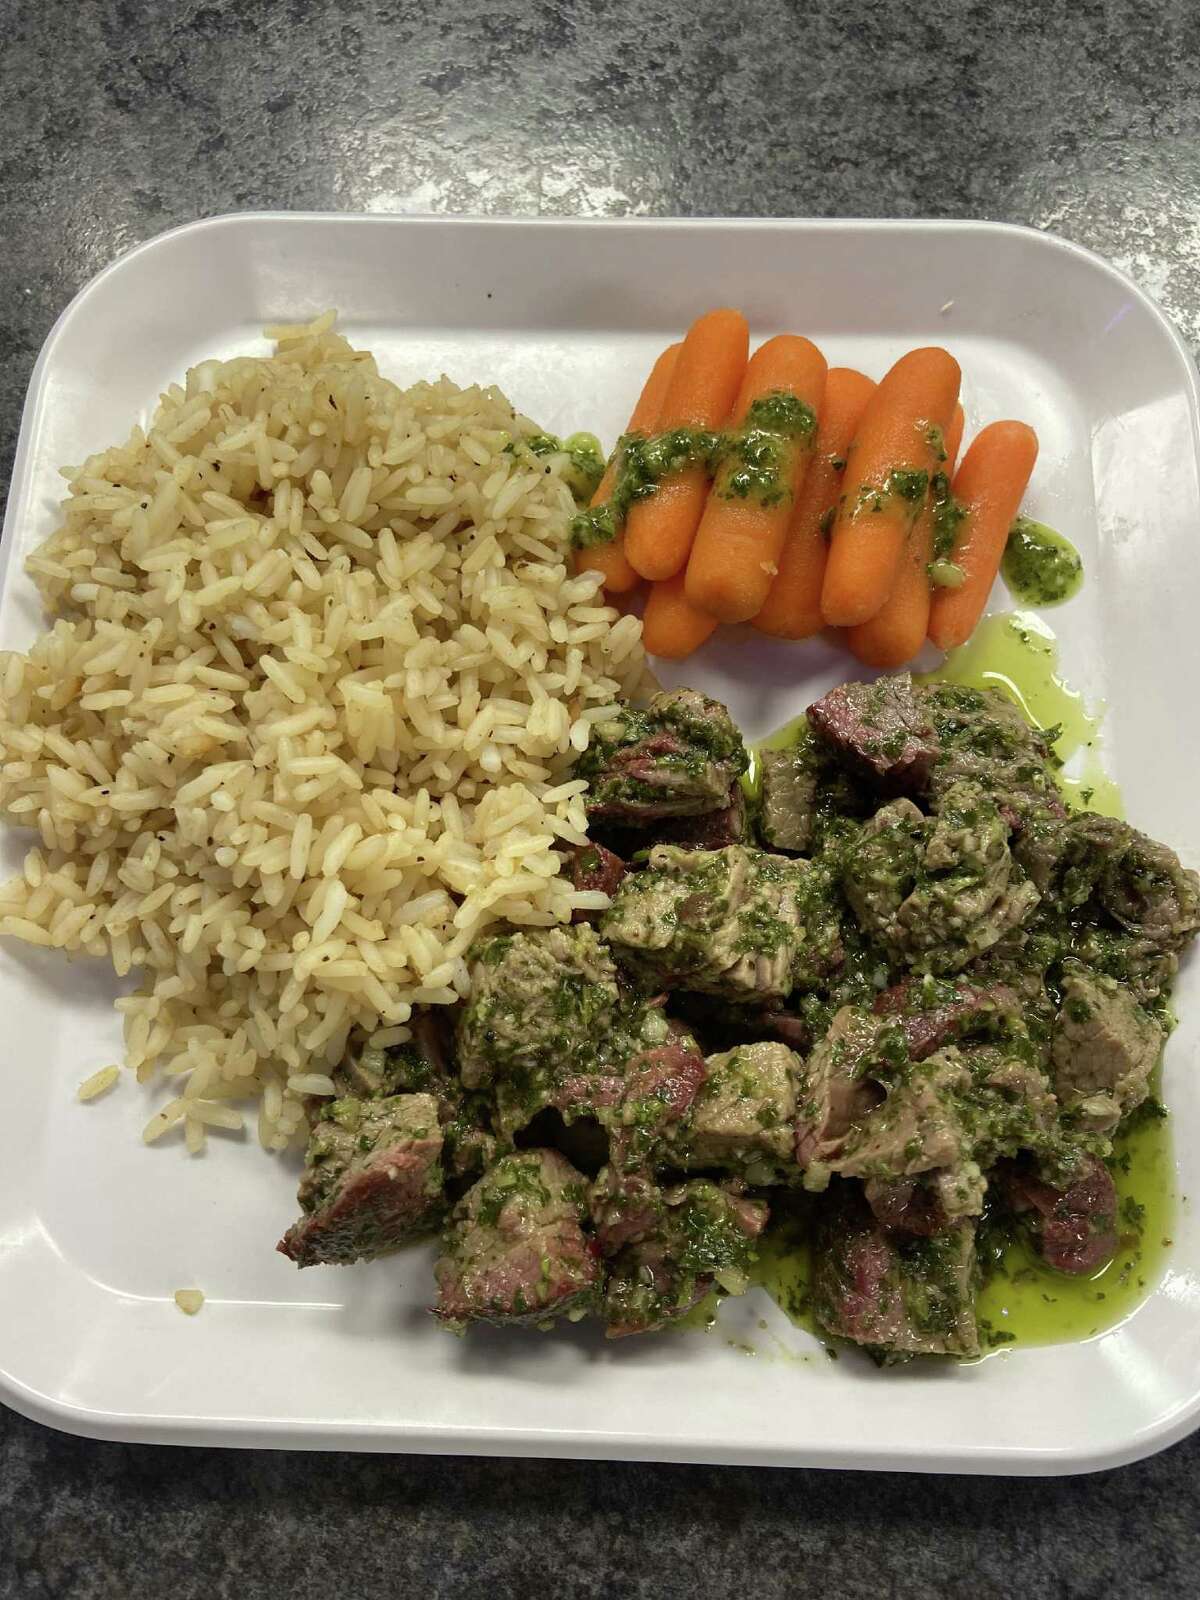 Former NFL player Jared Veldheer's chimichurri steak lunch he serves to the students. CREDIT: Photo courtesy of Katie Tietema